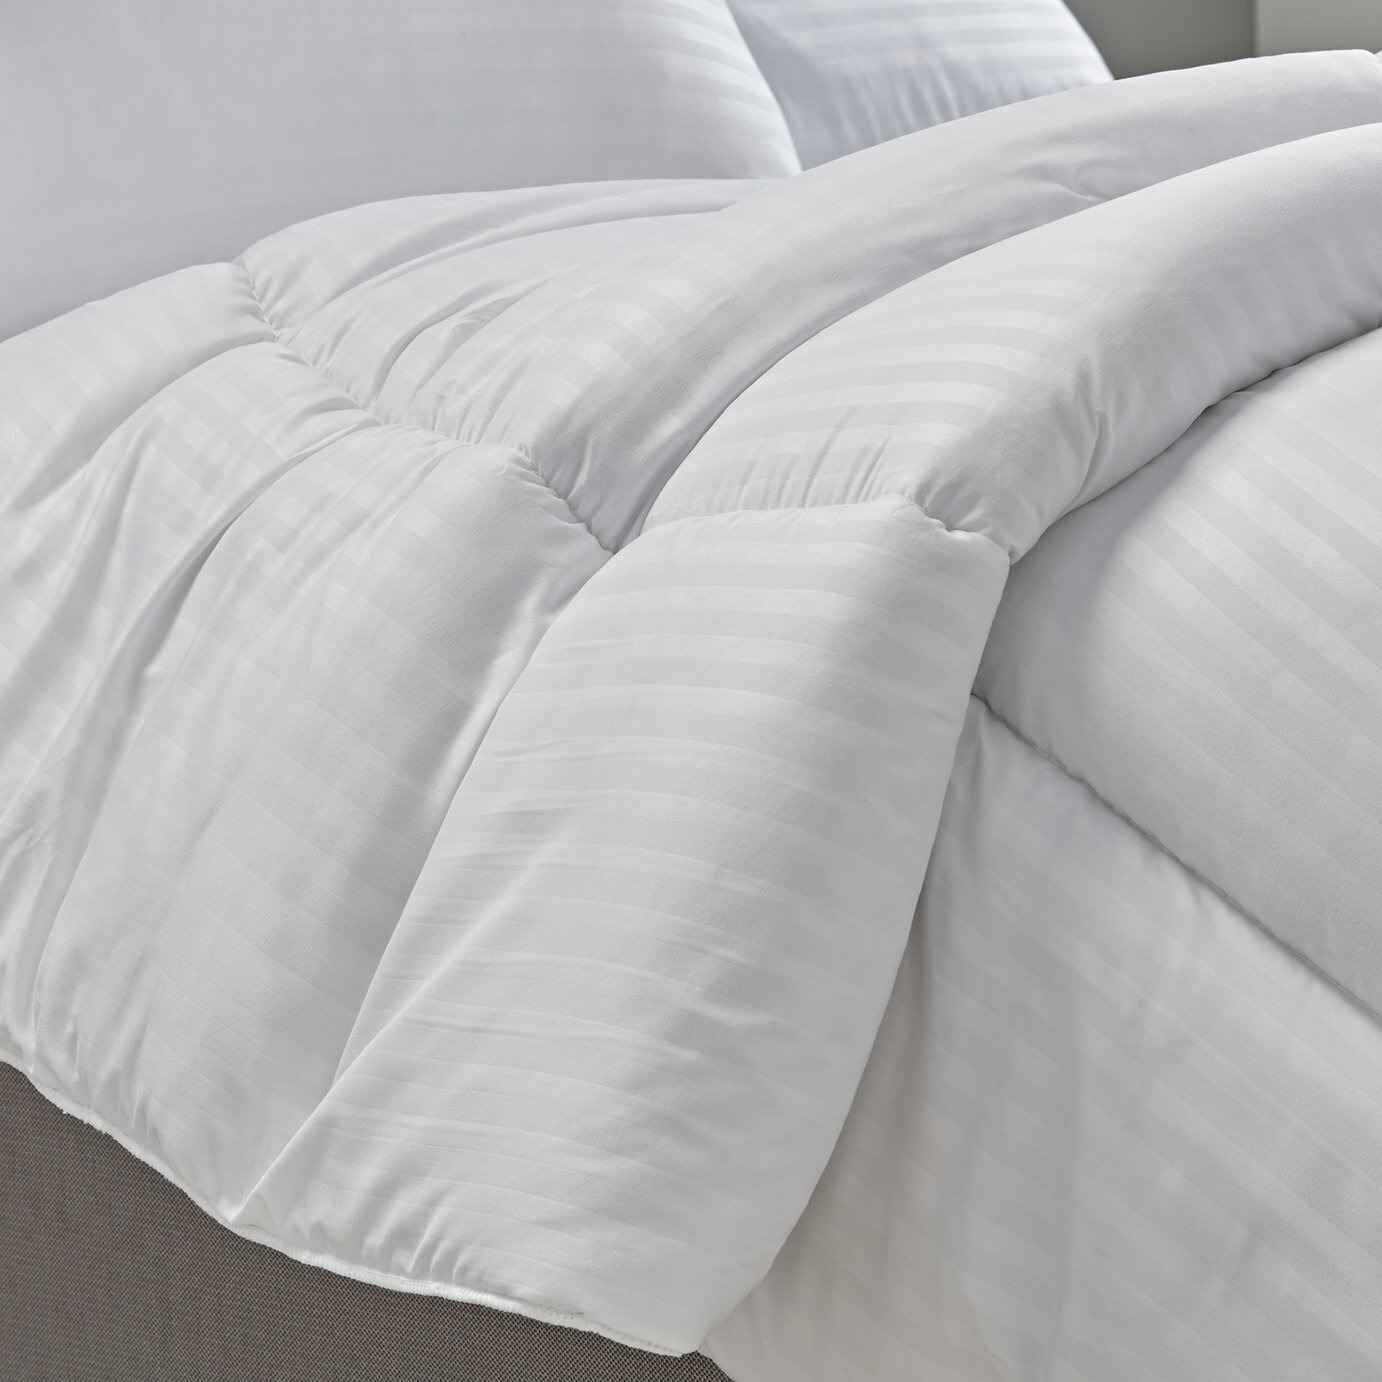 Cosmo Living 10.5 Tog Duvet - Double - image 1